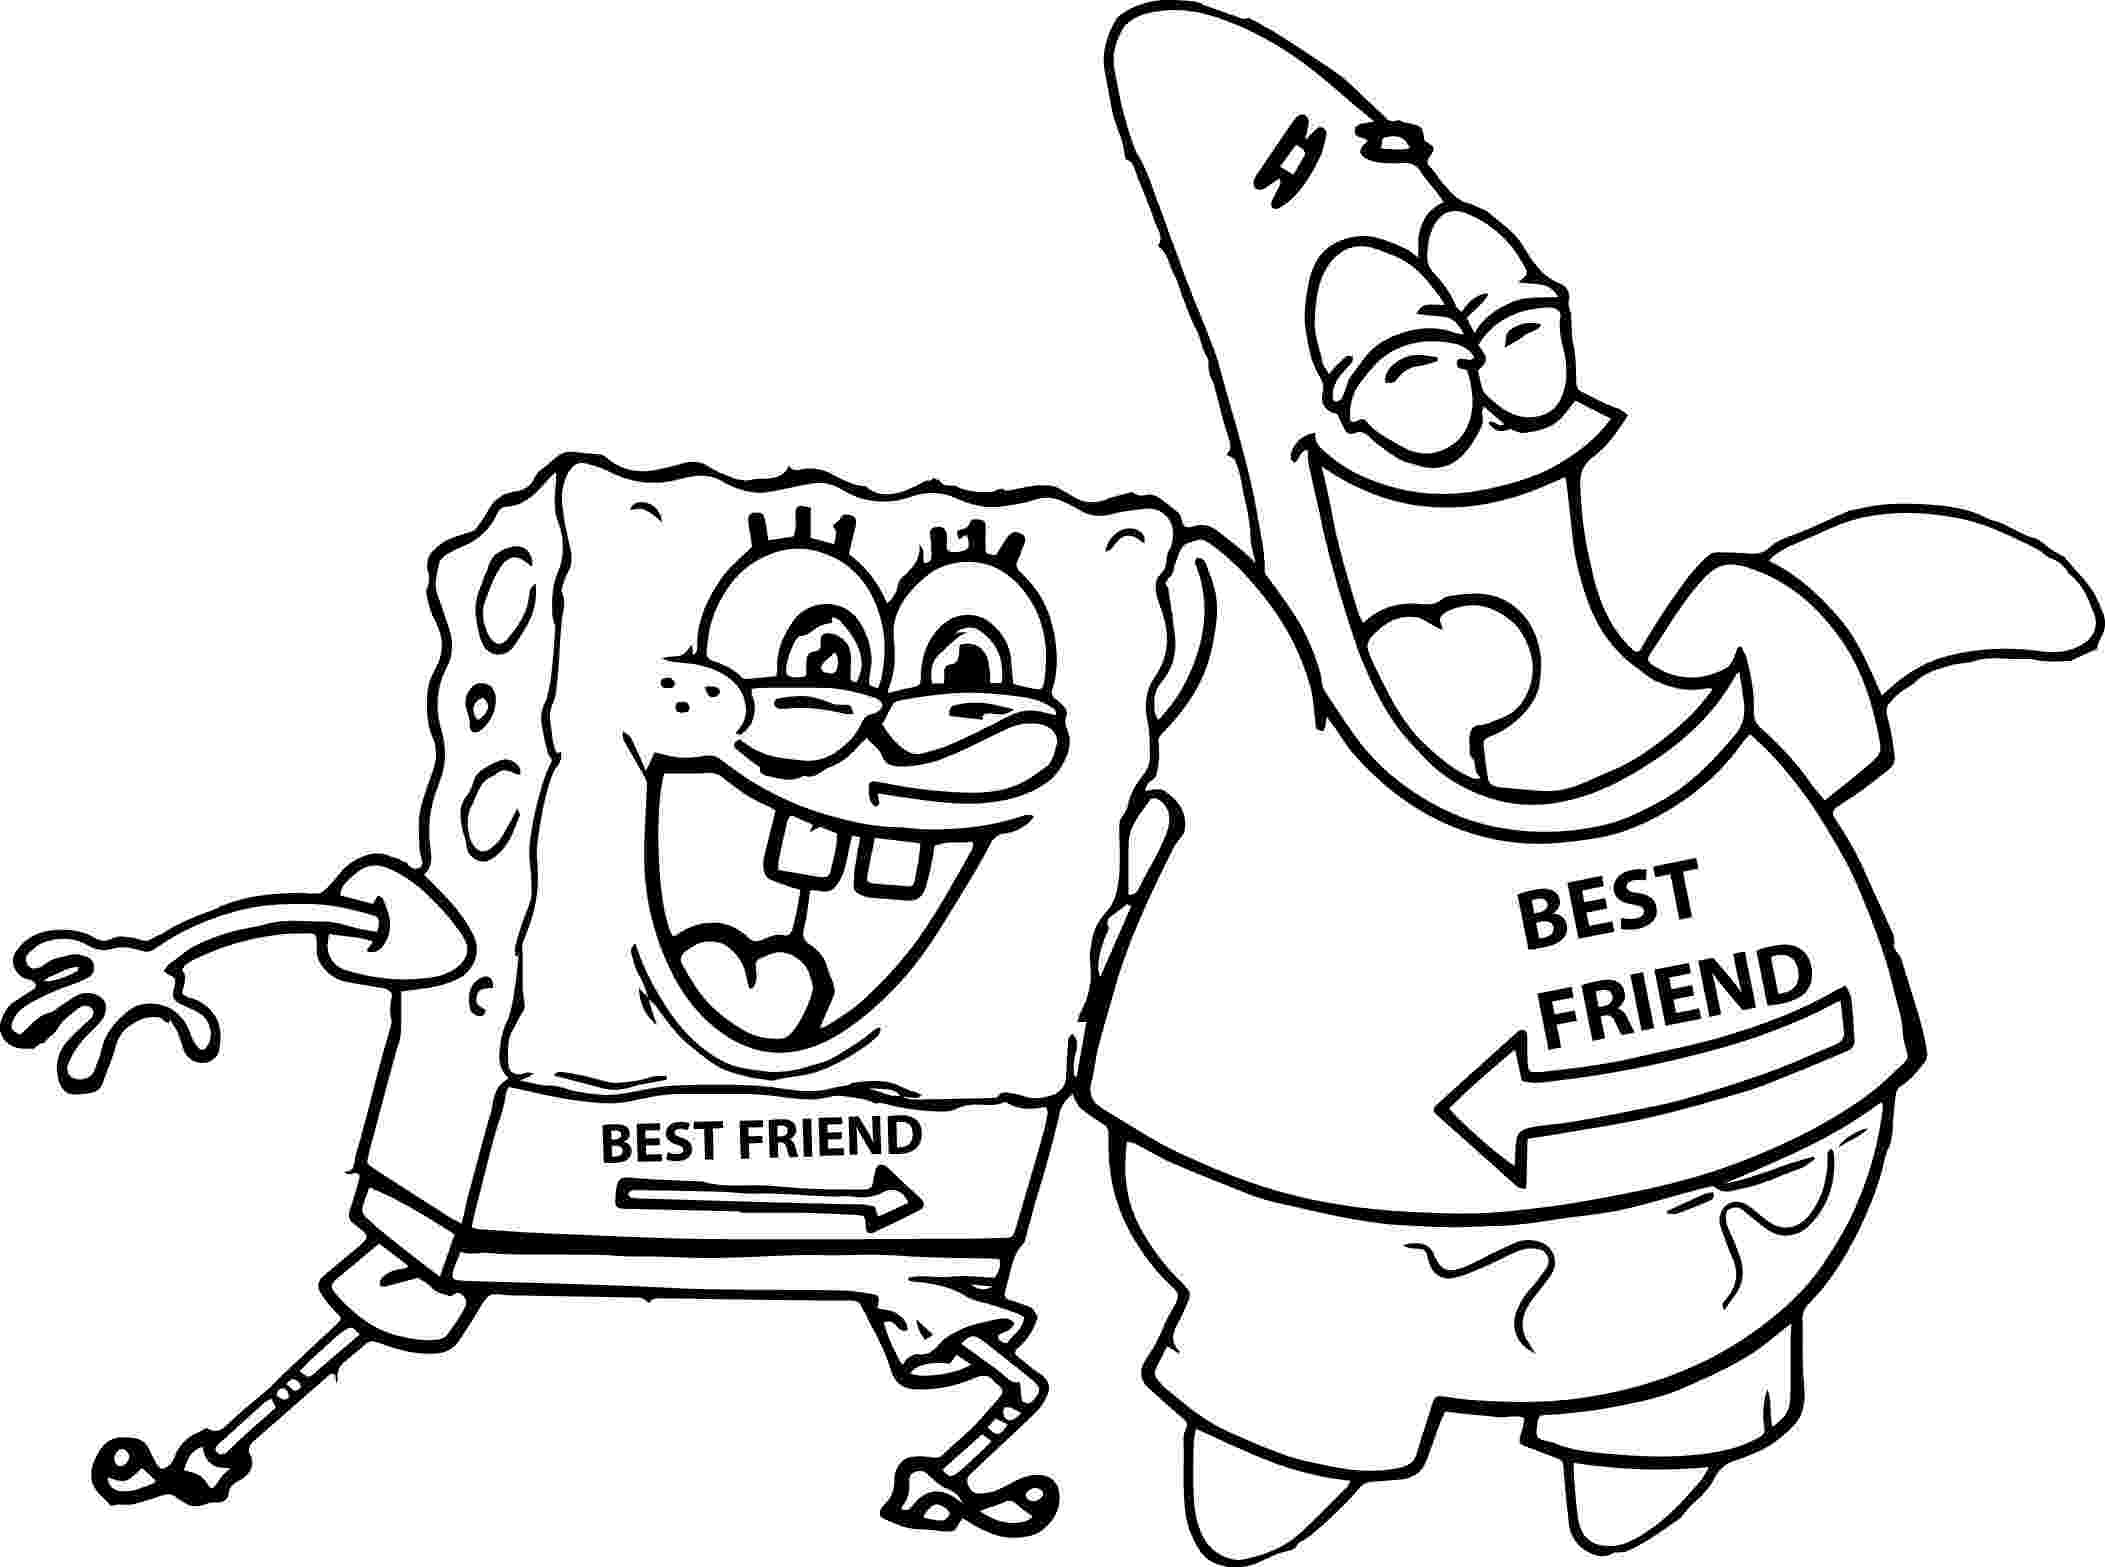 best friends colouring pages best friends coloring pages best coloring pages for kids best friends colouring pages 